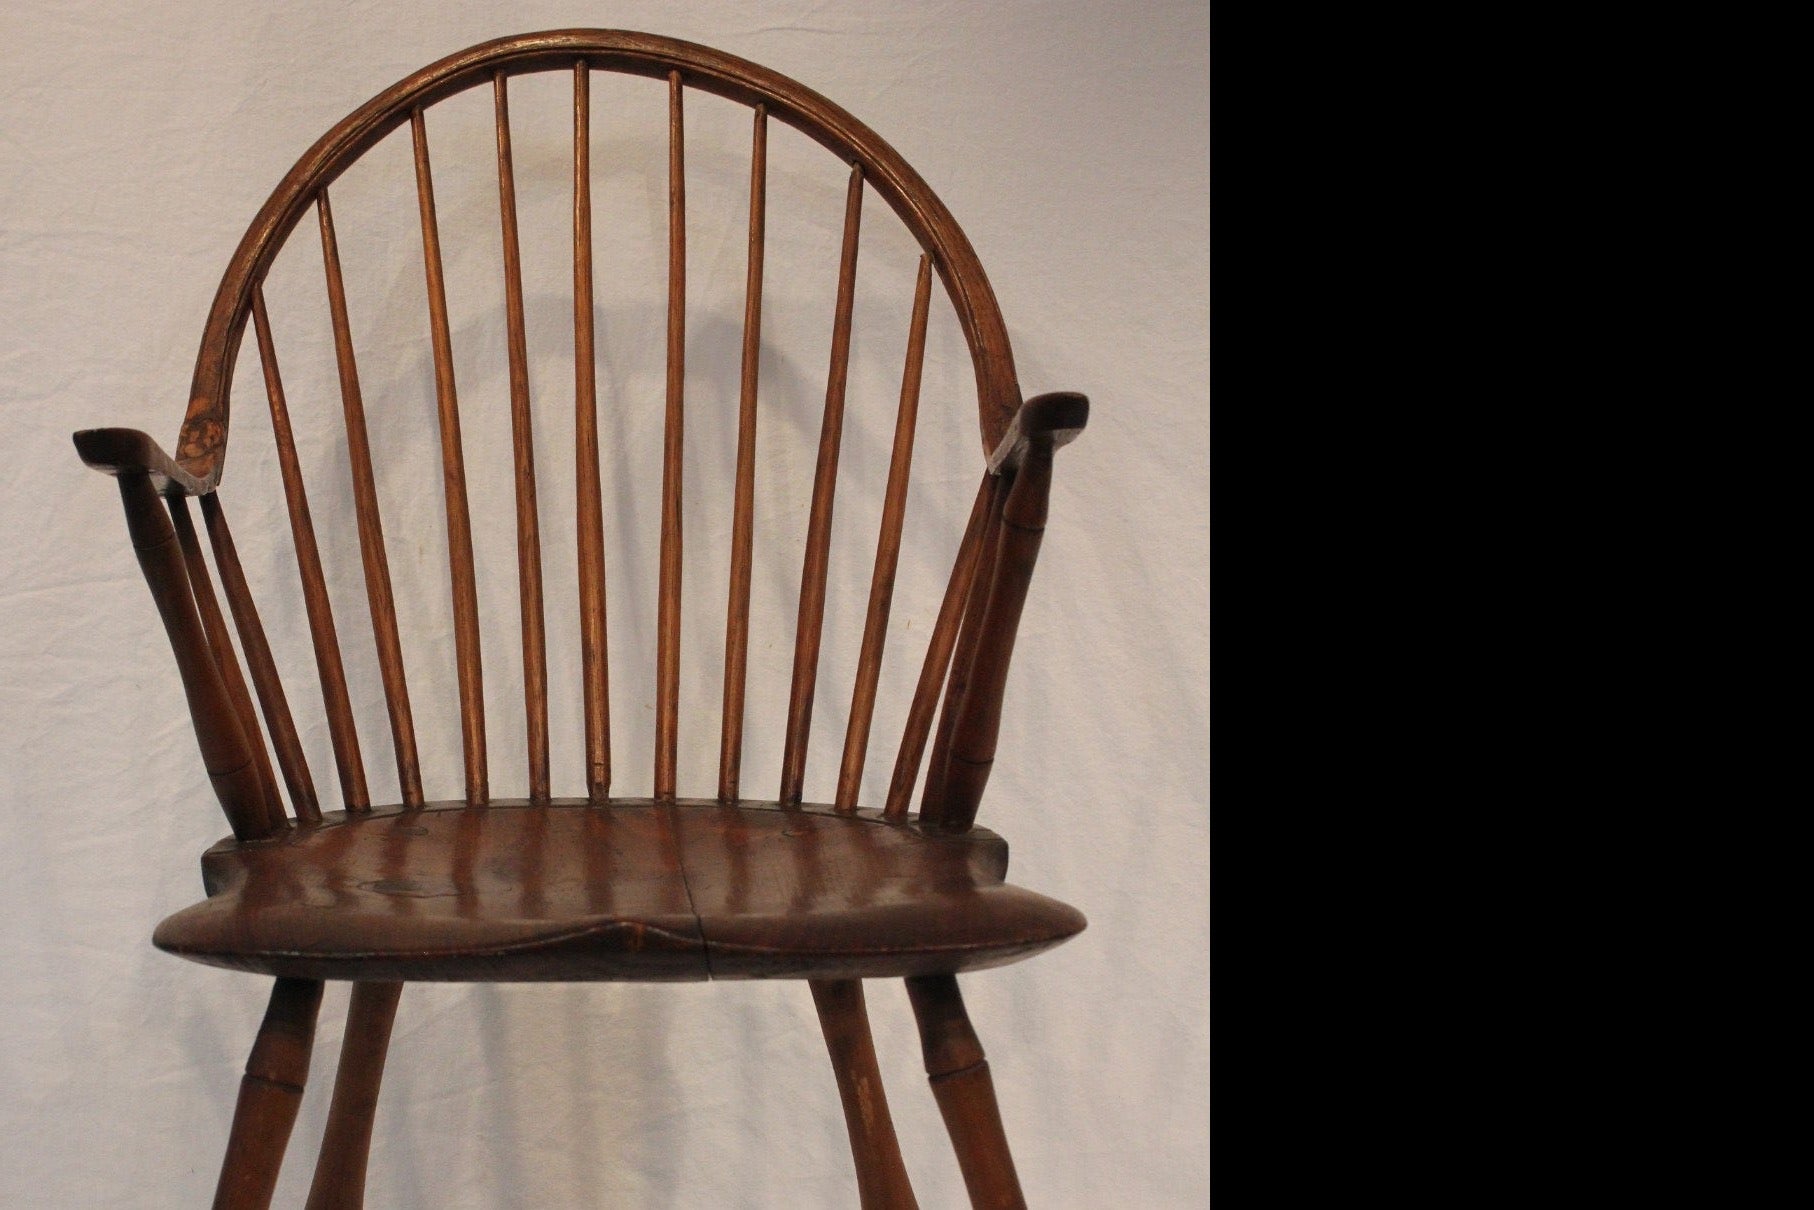 AF2-601: Antique 18th Century American Windsor Arm Chair